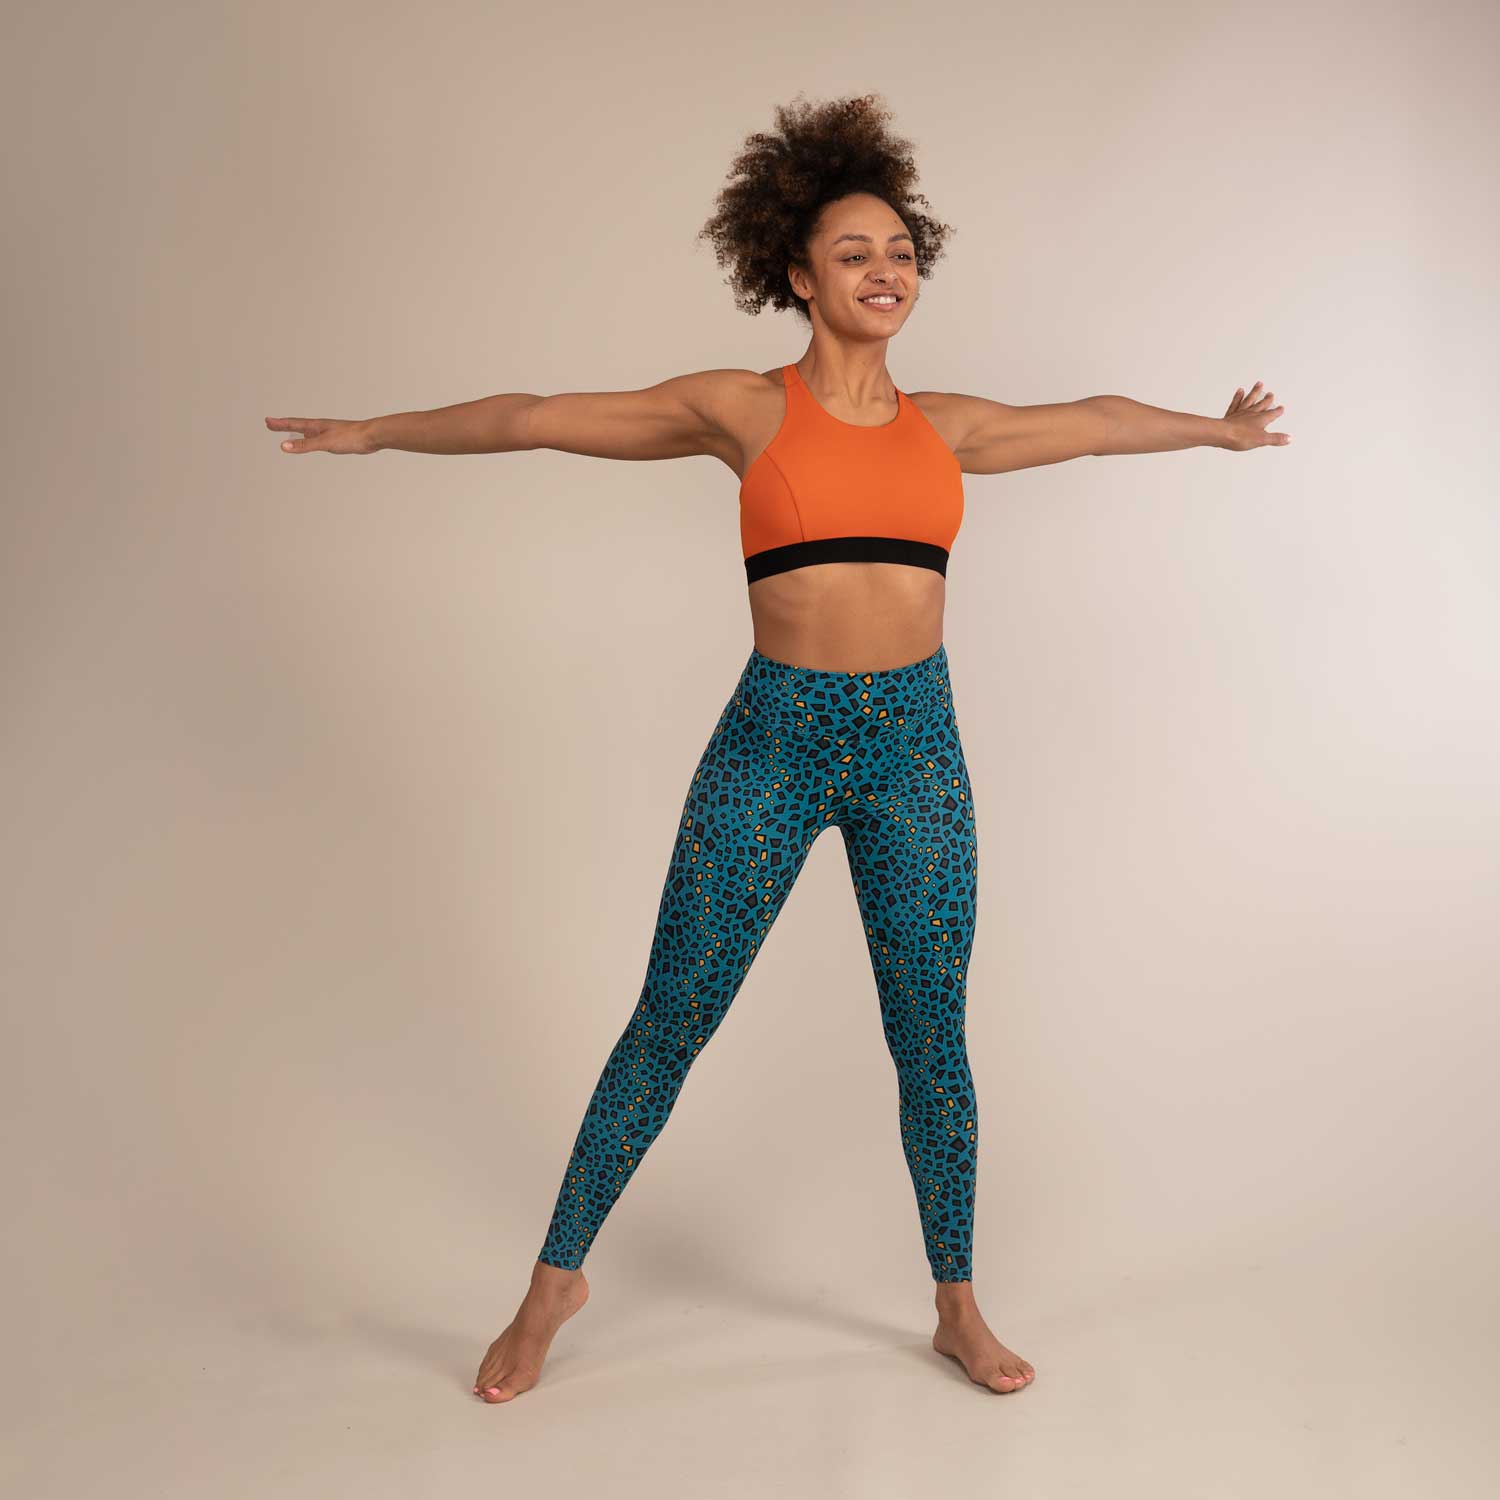 TITAN MINIMAL REPTILE | Printed Recycled Leggings | 3RD ROCK Clothing -  Kendal is 5ft 7 with a 28" waist, 38" hips and wears a size 12 F